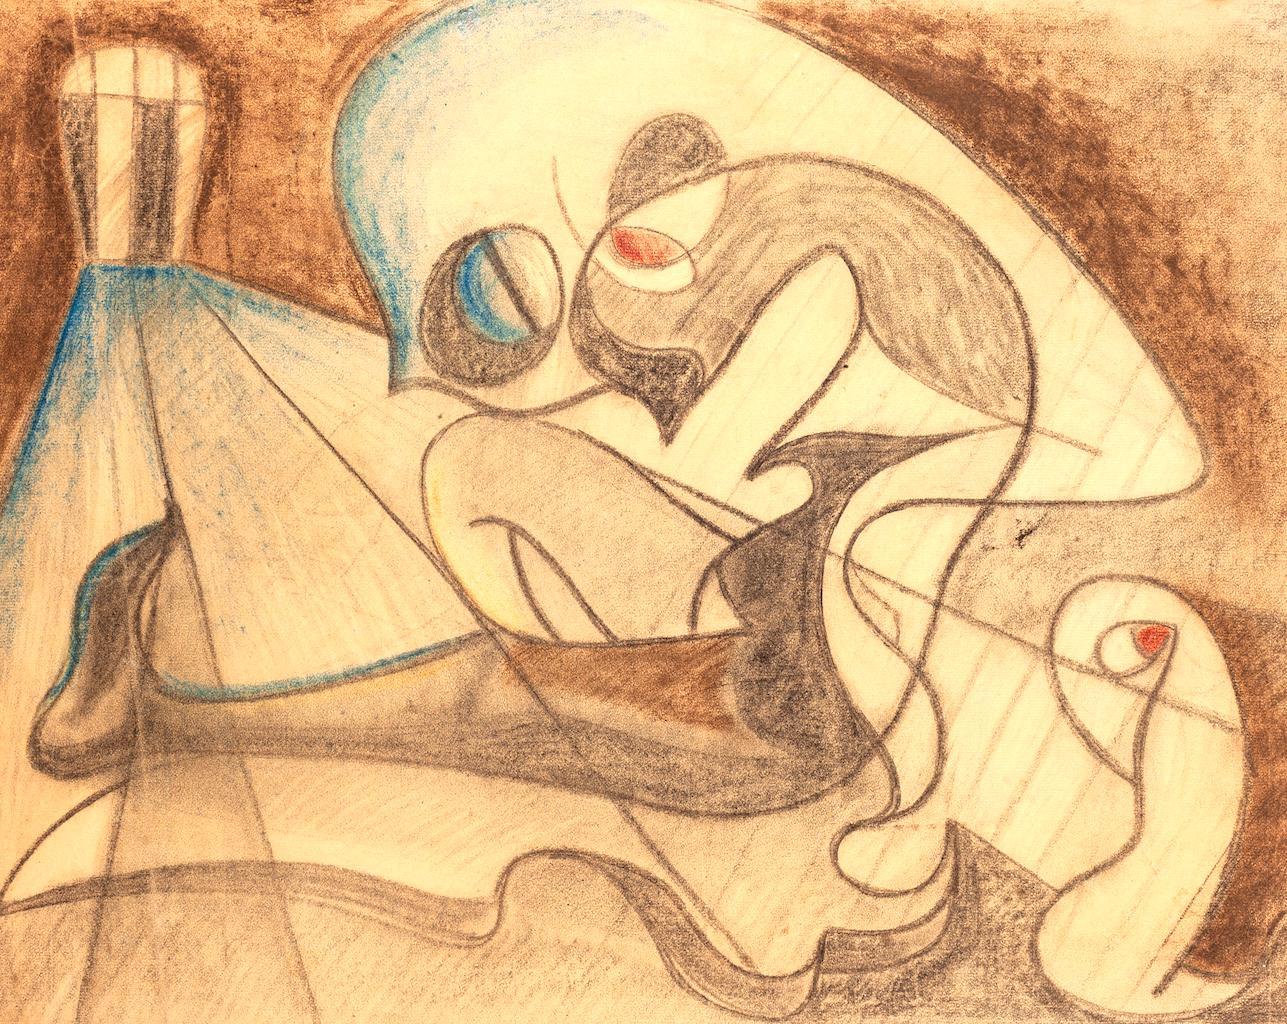 Edgar Stoëbel Abstract Drawing - Composition - Original Mixed Media On Paper by Edgar Stoebel - Late 1960s